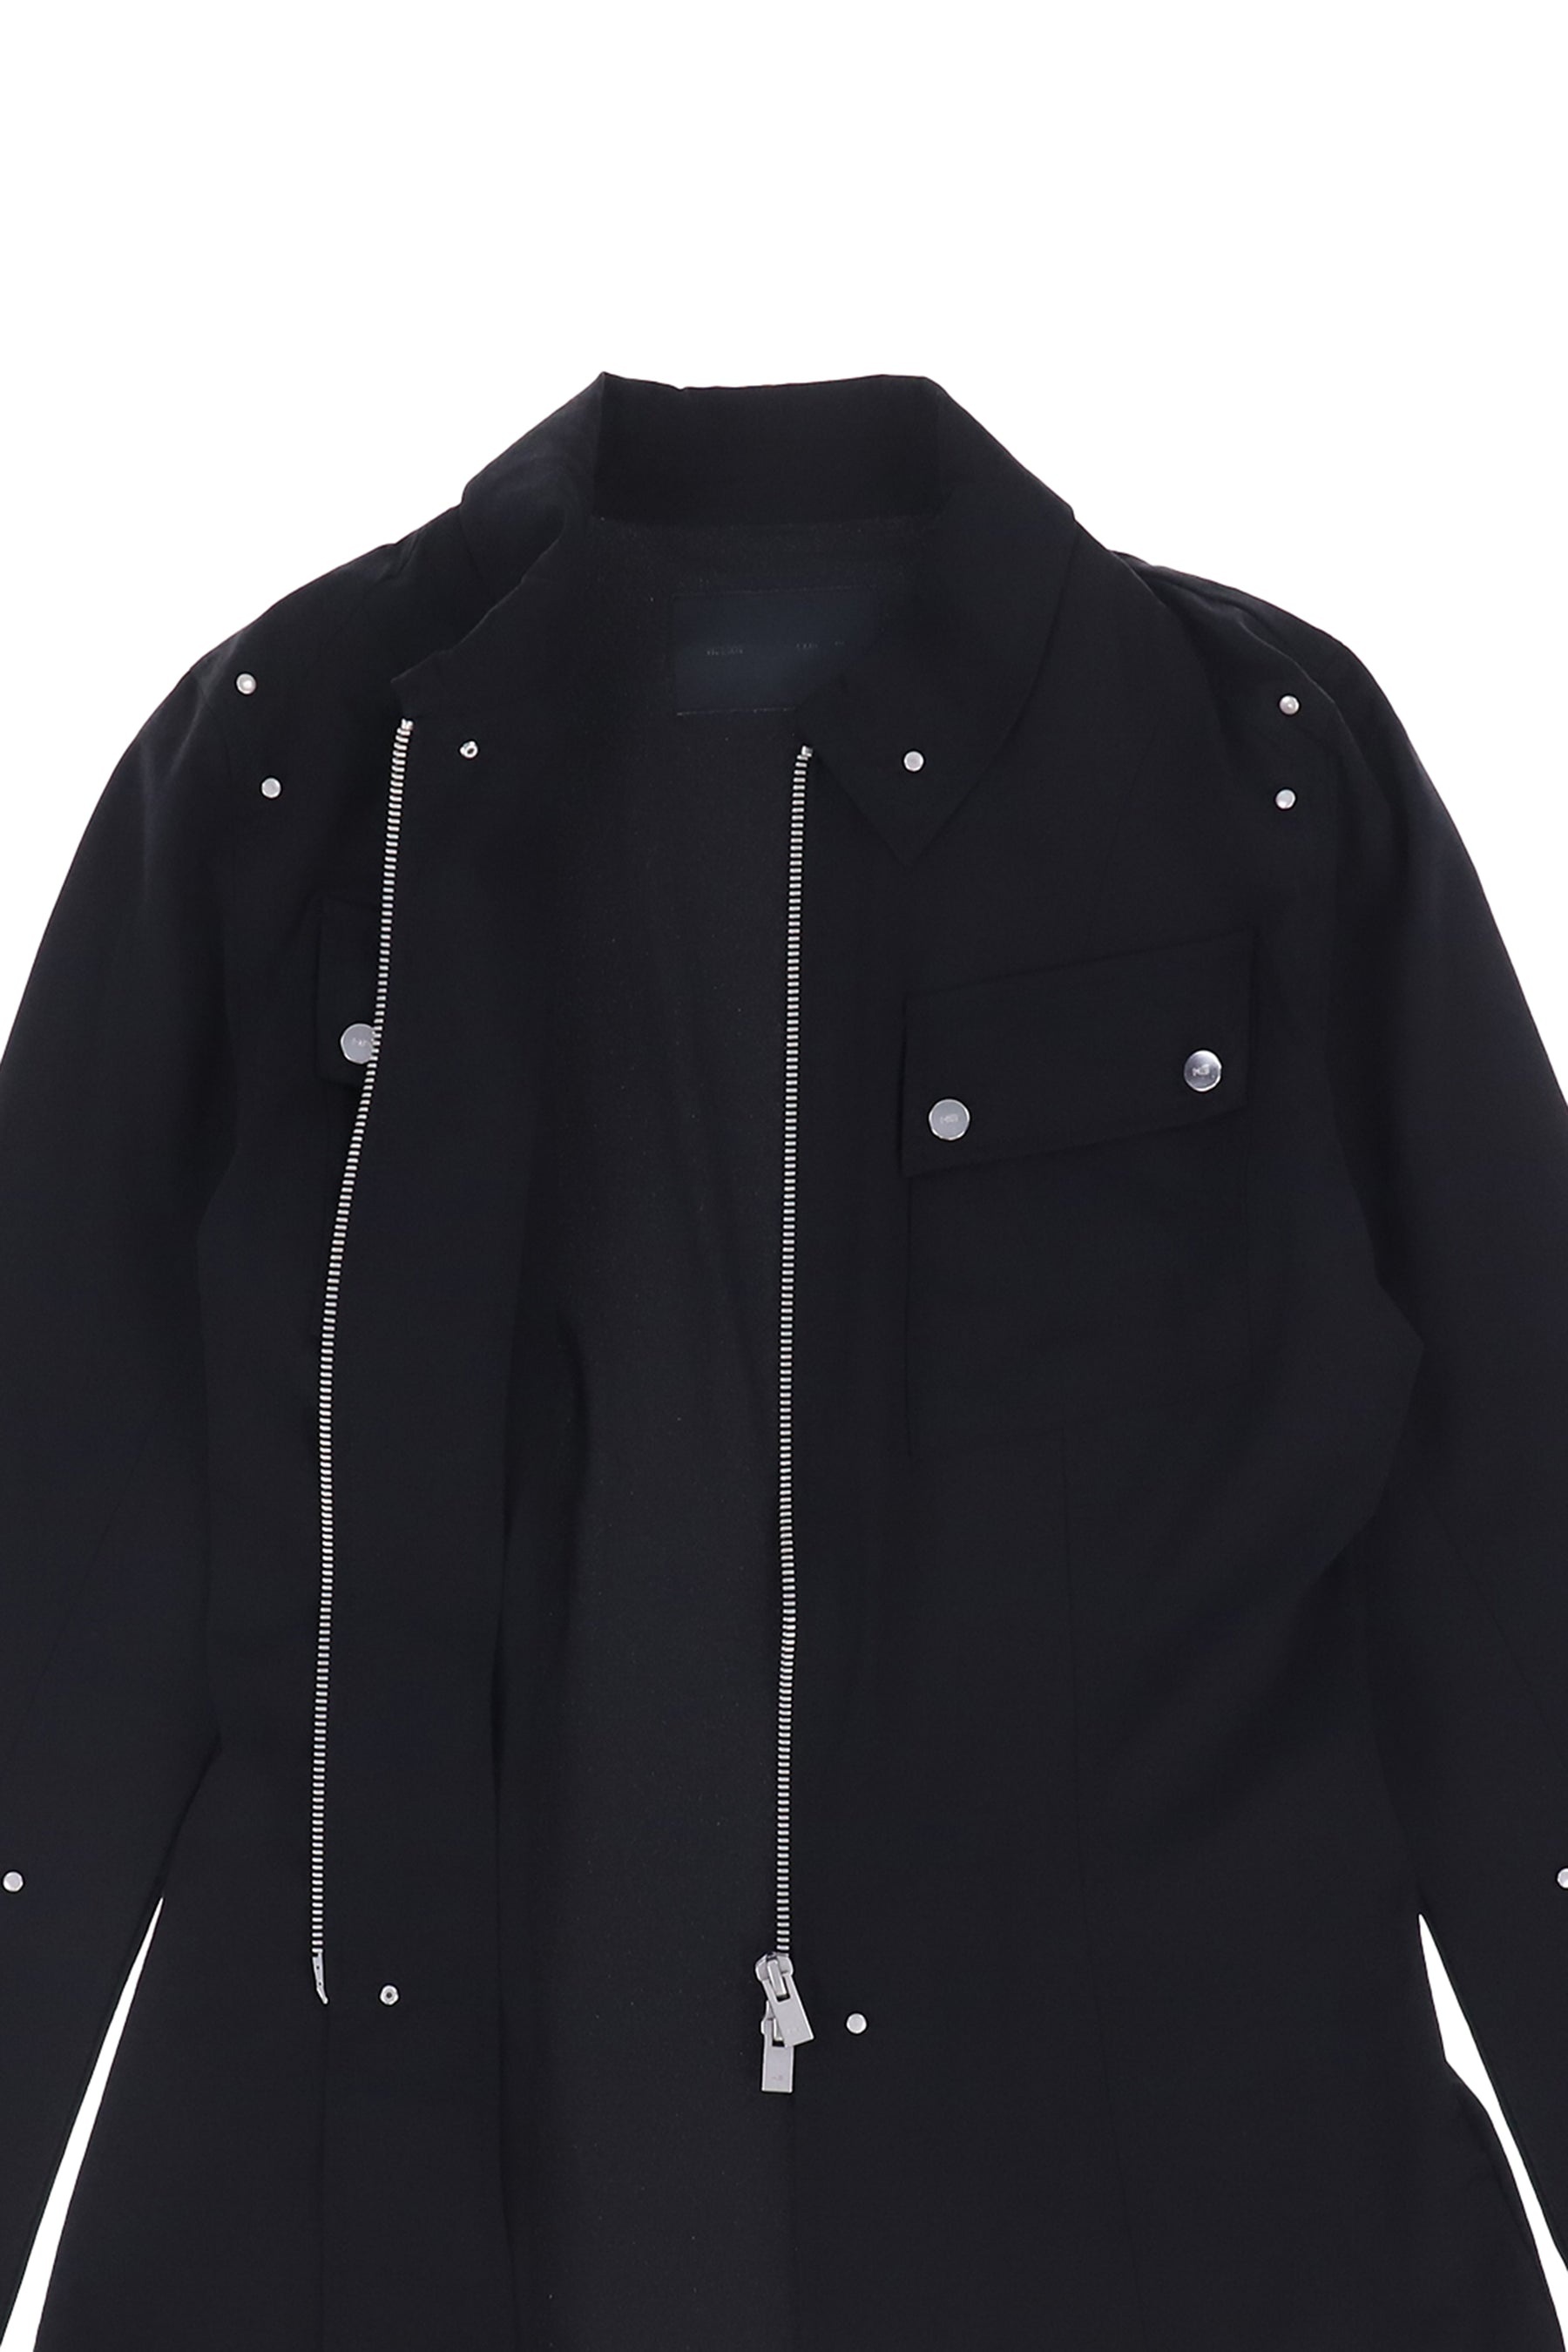 AFFINITY TECHNICAL TAILORED BLAZER / BLK - 3